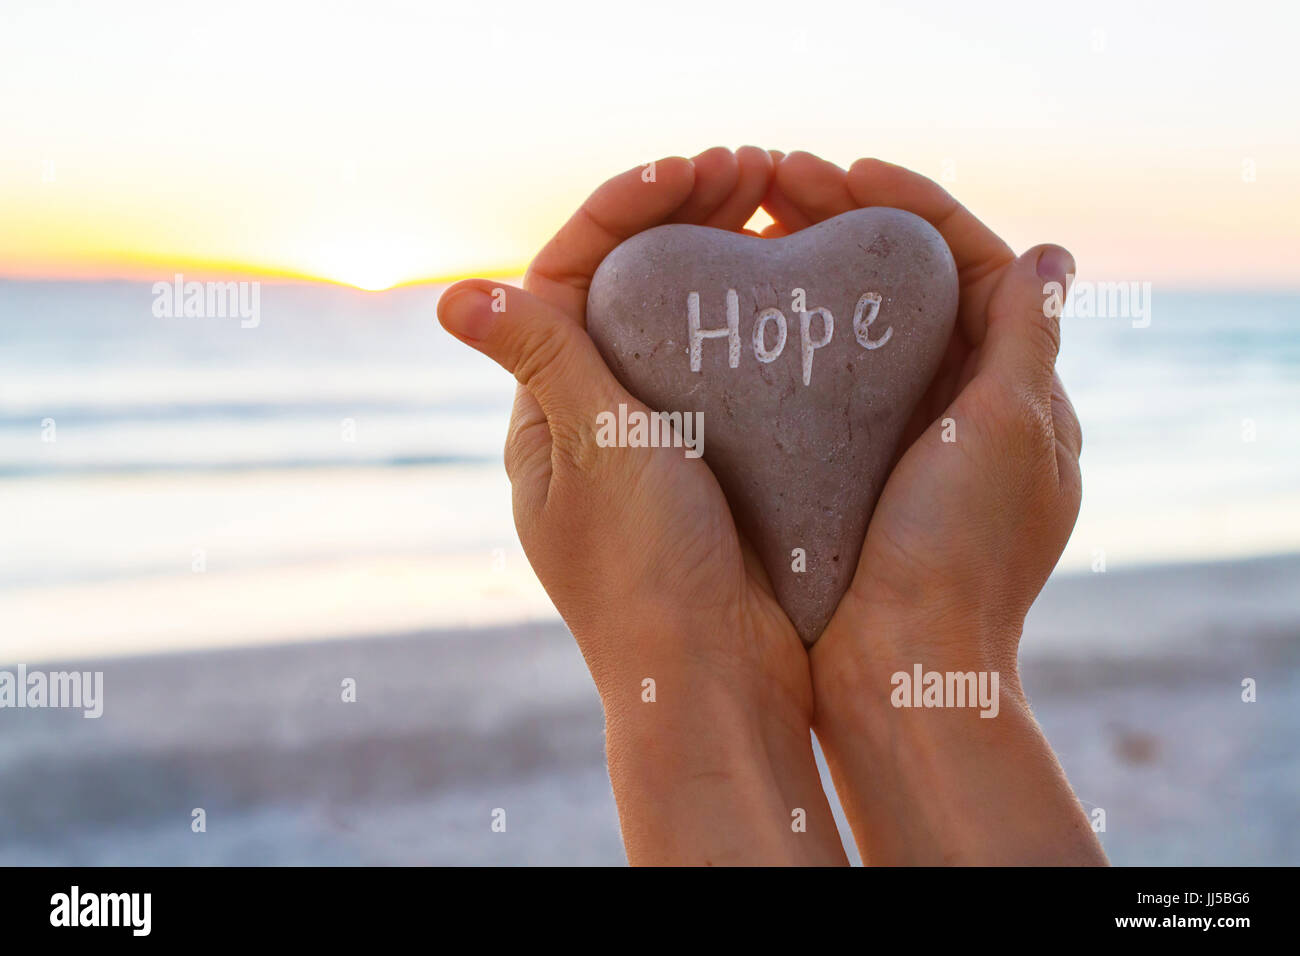 hope concept, hands holding stone with word written on it Stock Photo